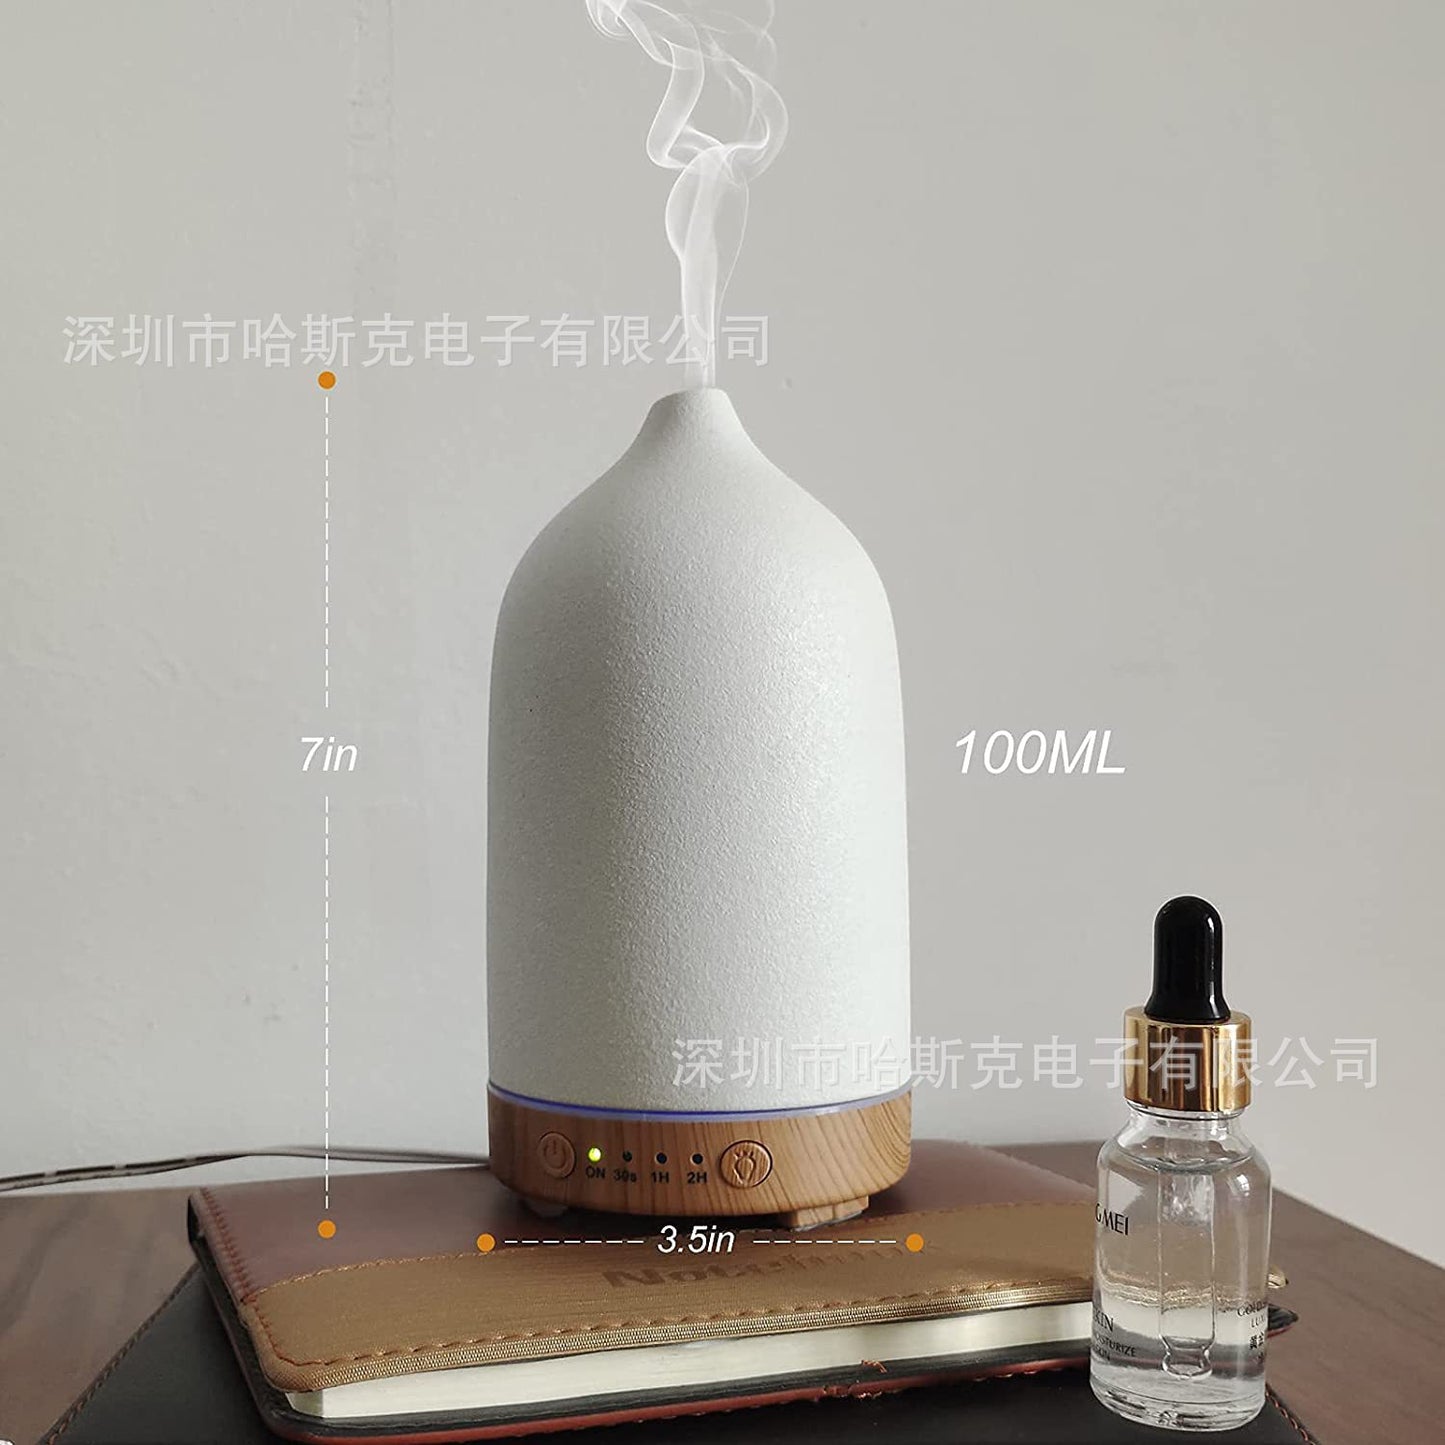 250ML Ceramic Ultrasonic Aromatherapy Diffusers for Home, Wood Stone Essential Oil Diffuser